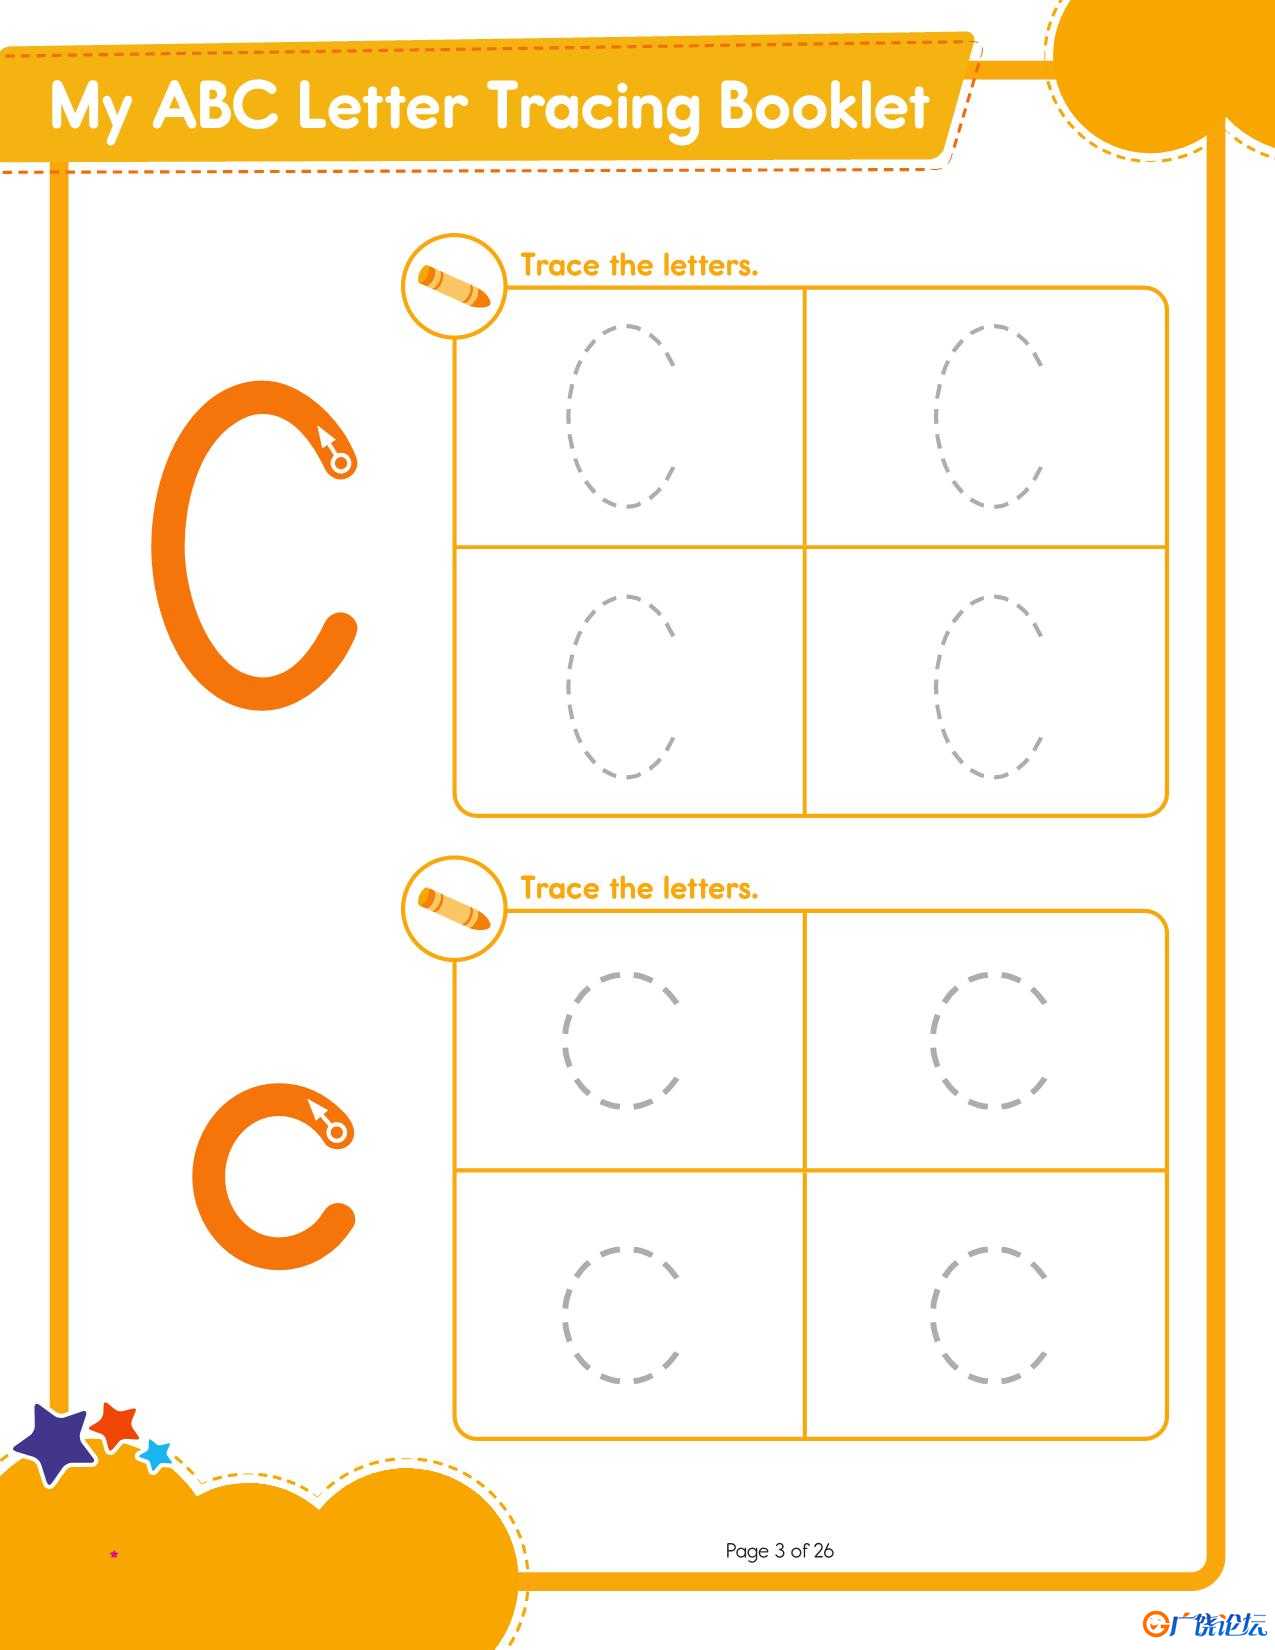 abc-letter-tracing-booklet-us 27页PDF